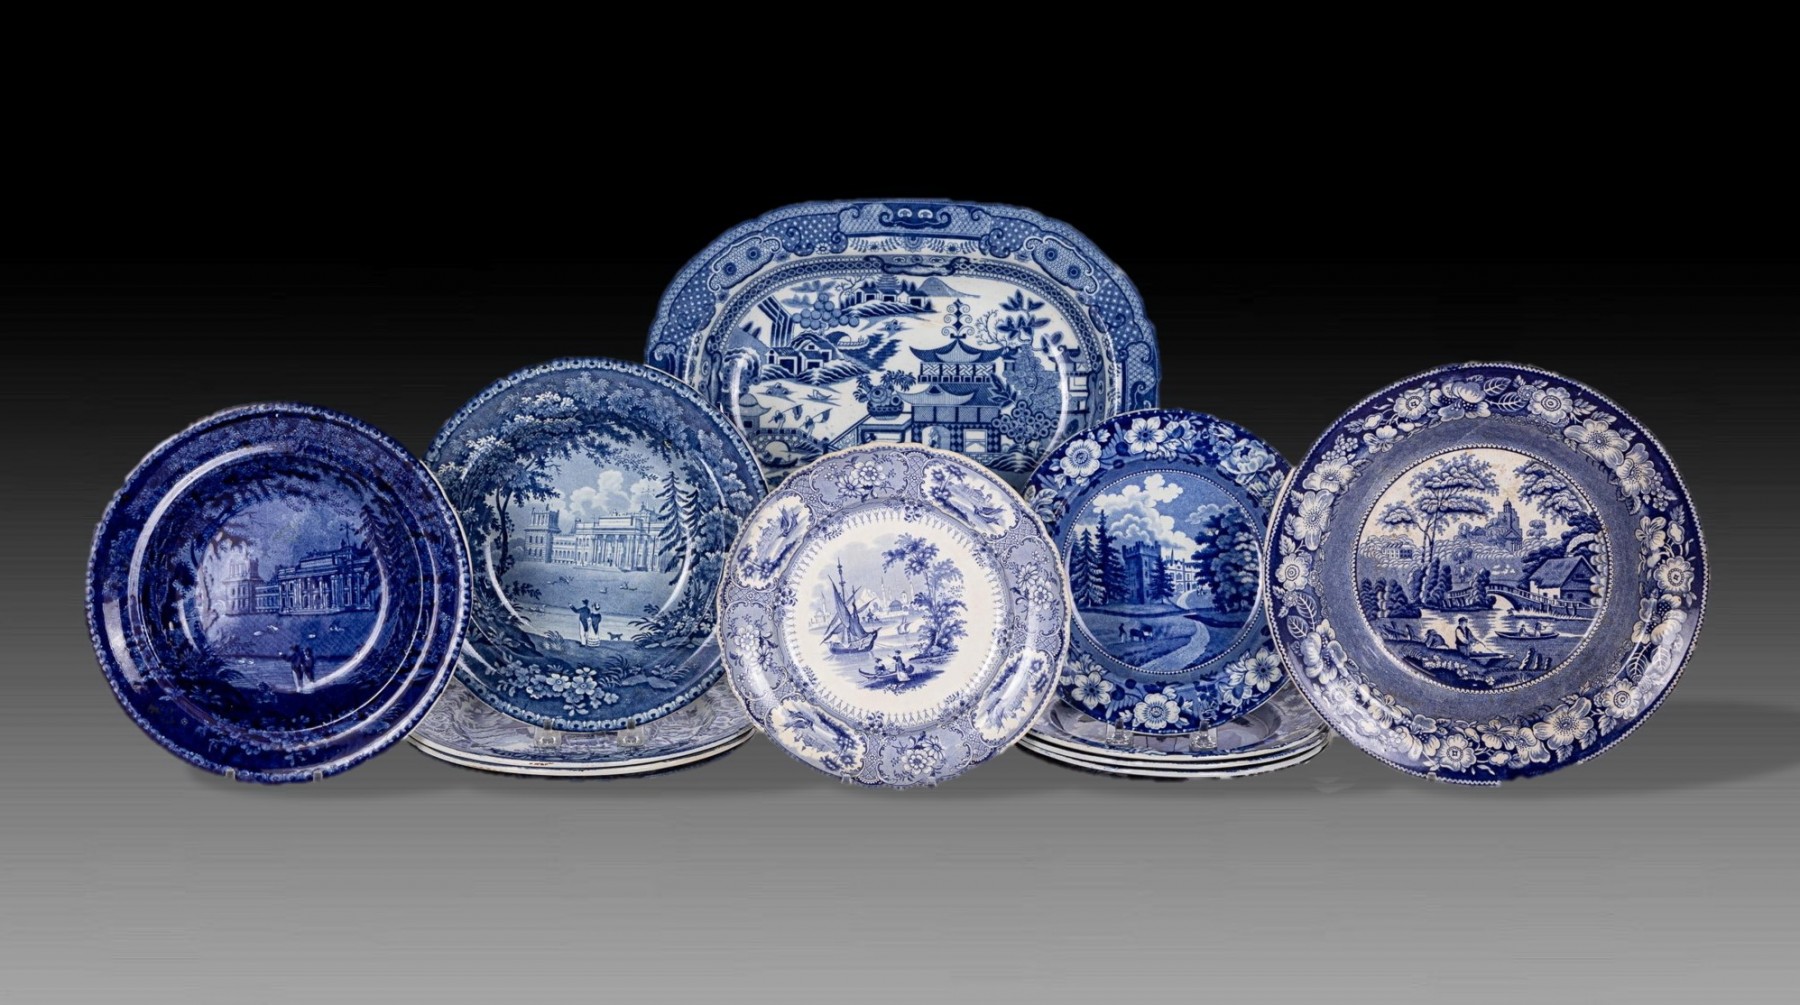 Examples of transfer-printed blue and white ceramics